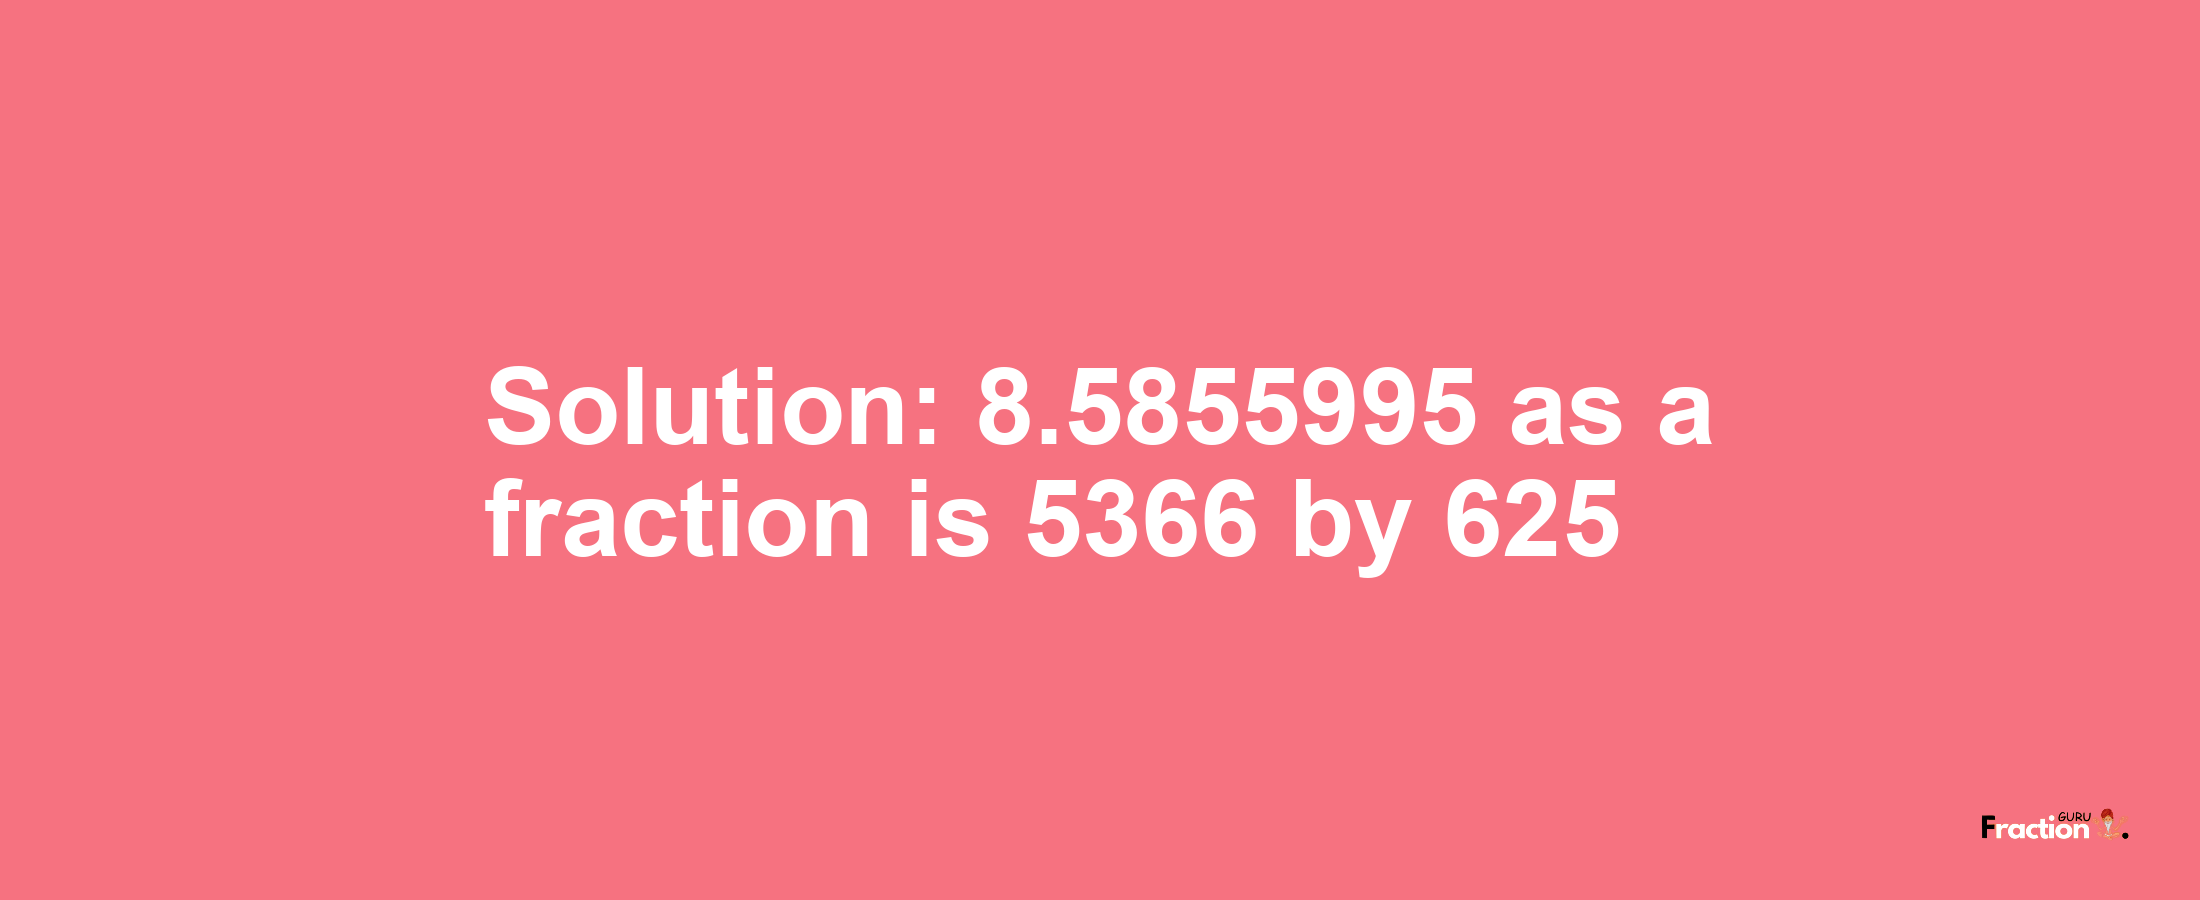 Solution:8.5855995 as a fraction is 5366/625